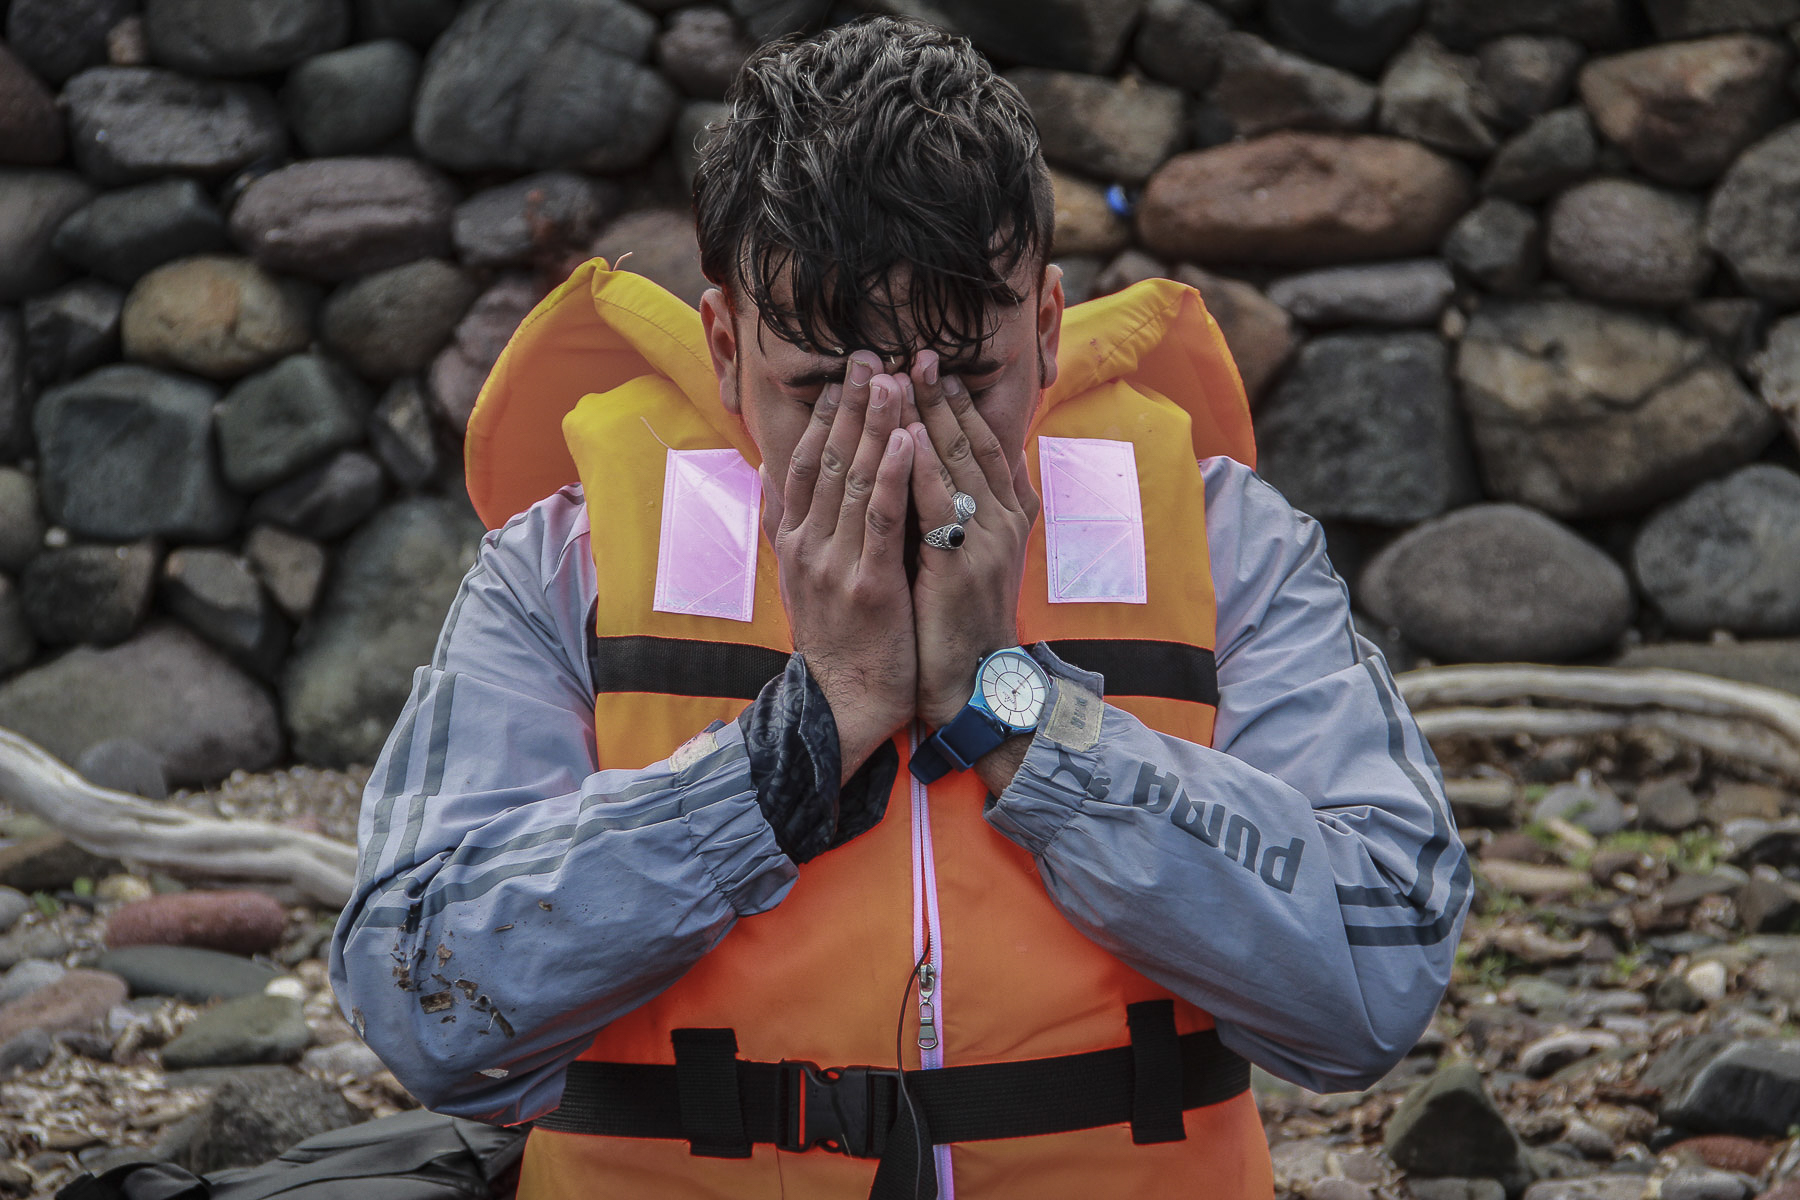   A Syrian refugee sinks to his knees moments after arriving safely to the shores of Lesvos. The boat that left before his never made it and at least another 33 refugees drowned in the Aegean that day. October 2015.  